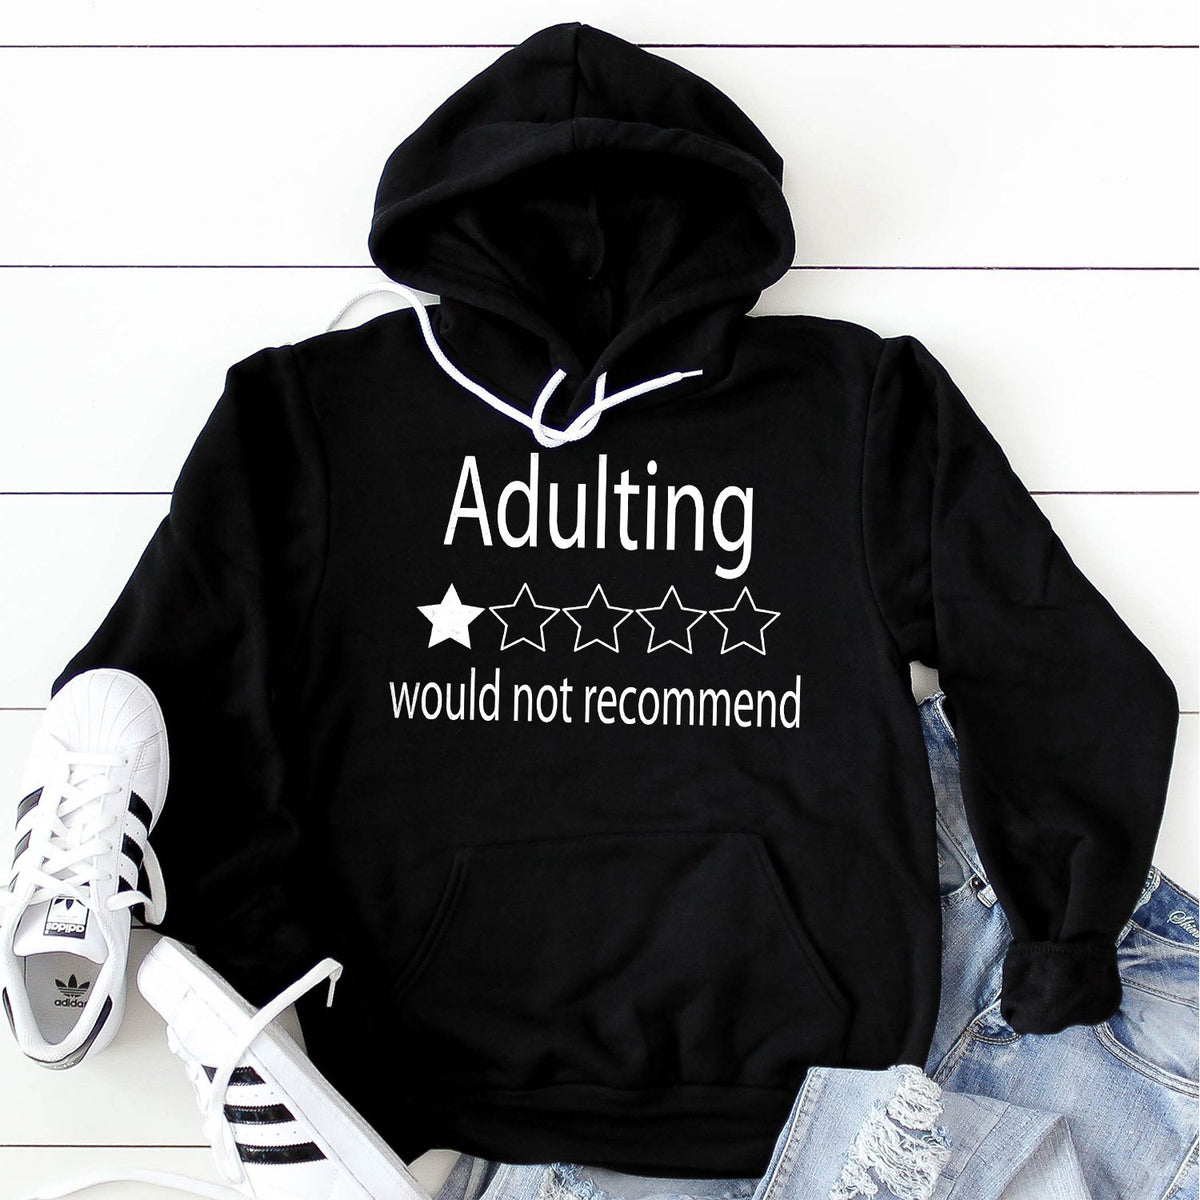 Adulting Would Not Recommend - Hoodie Sweatshirt